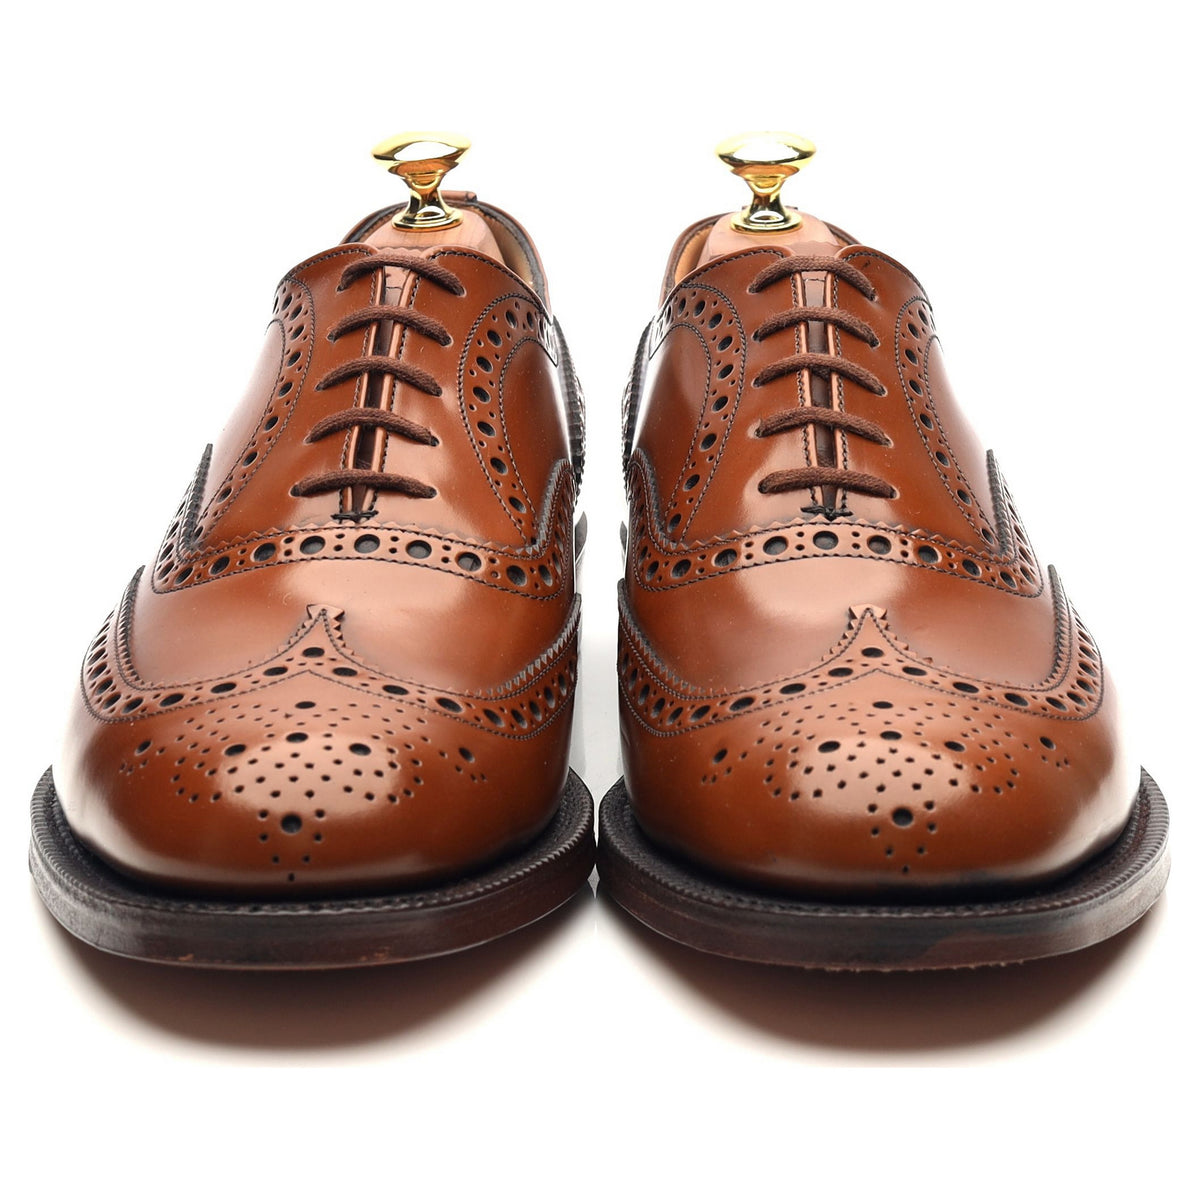 Burwood' Tan Brown Leather Brogues UK 8 G - Abbot's Shoes